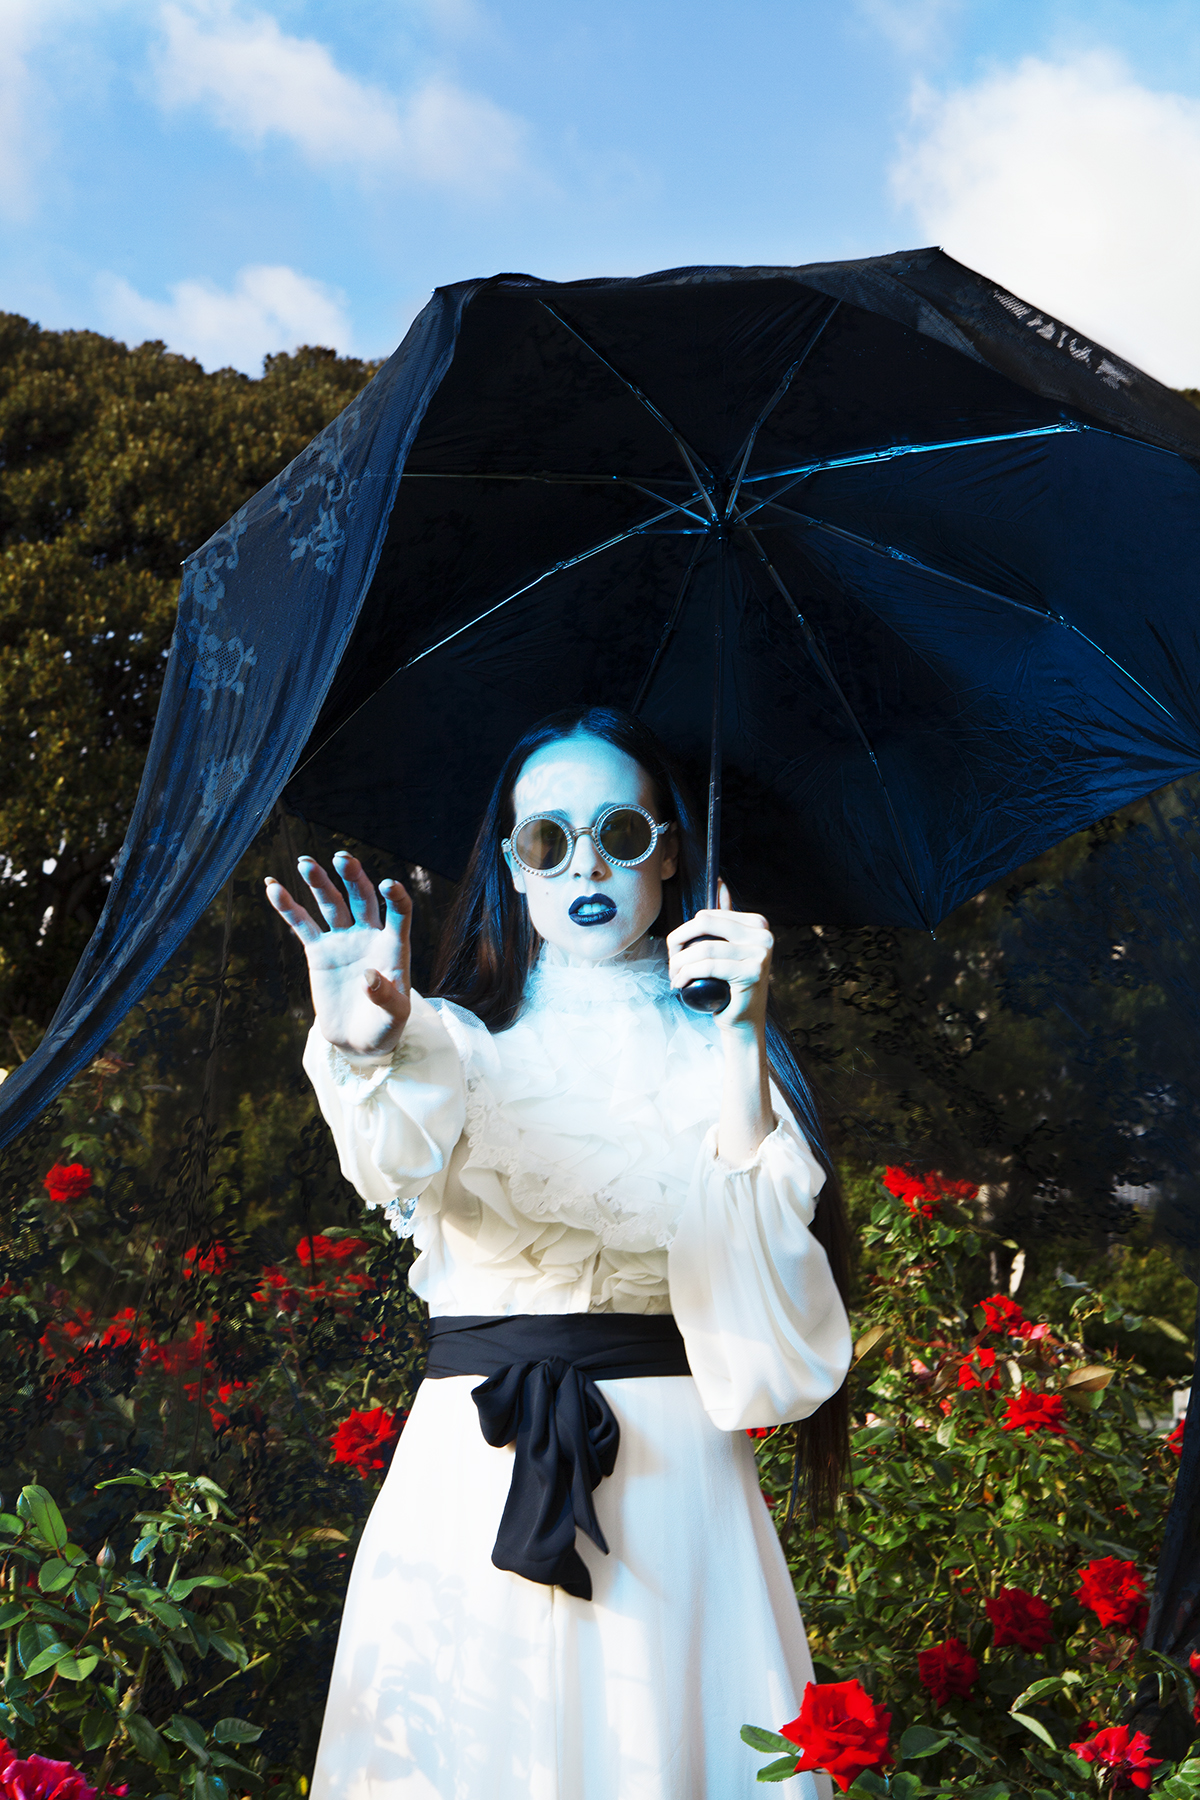 Track Of The Day #753: Allie X - Never Enough